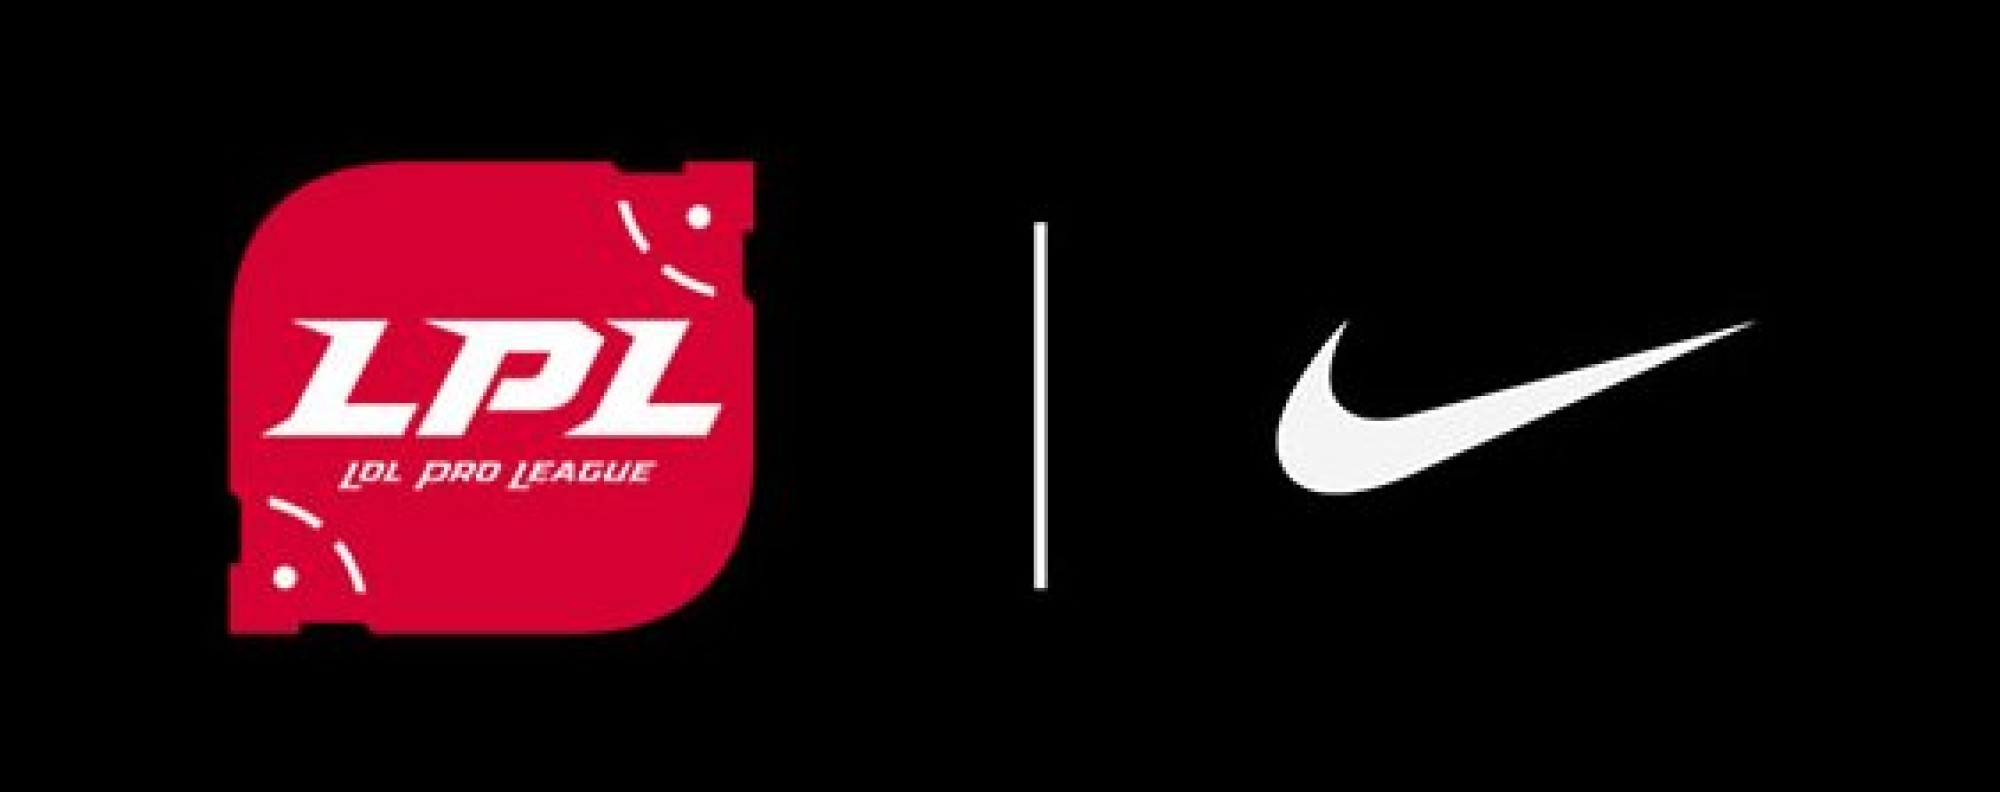 Nike Taps Its First Esports Player, China's League of Legends Pro